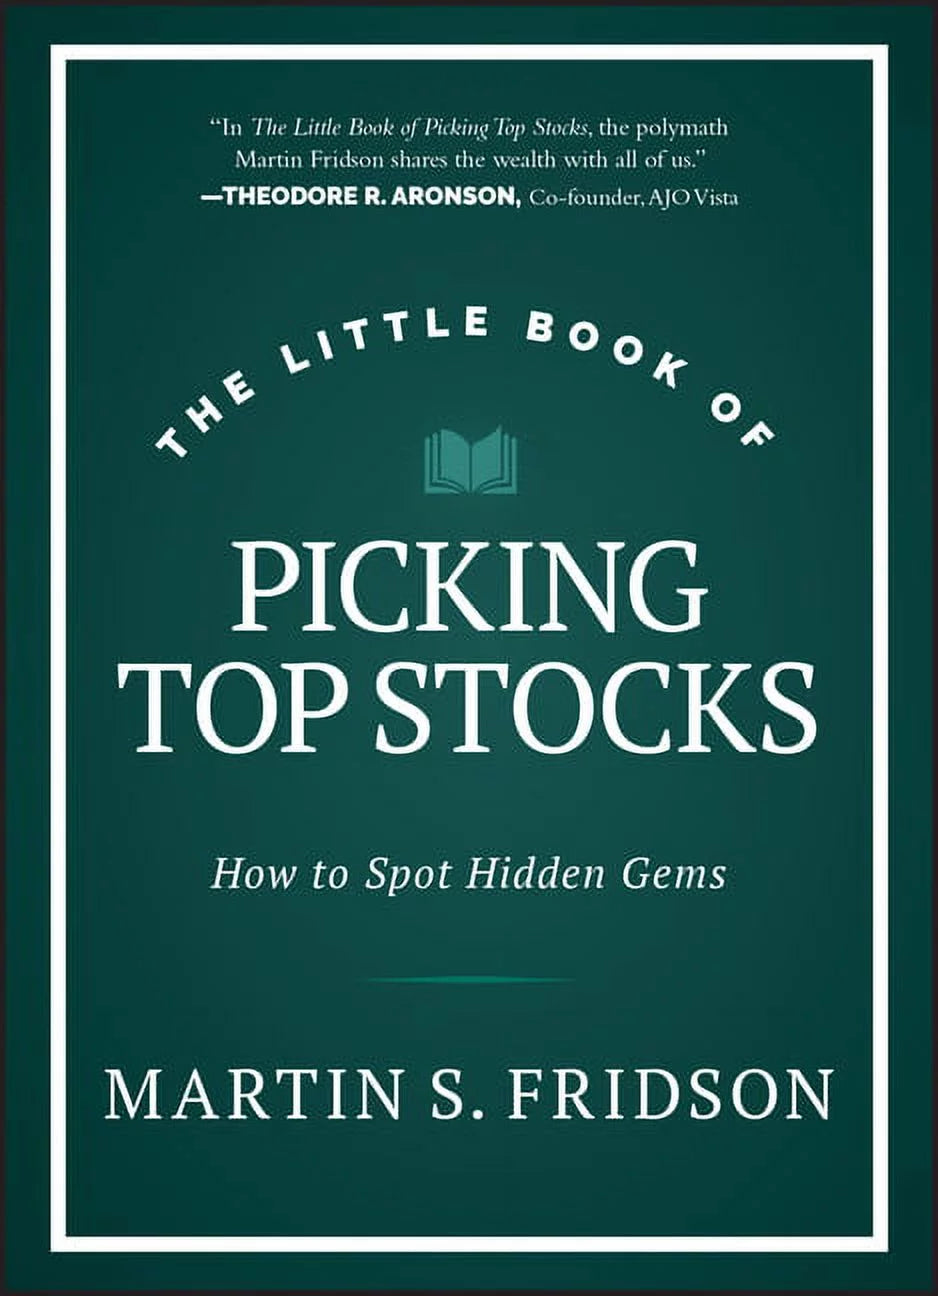 Little Books. Big Profits: The Little Book of Picking Top Stocks (Hardcover)